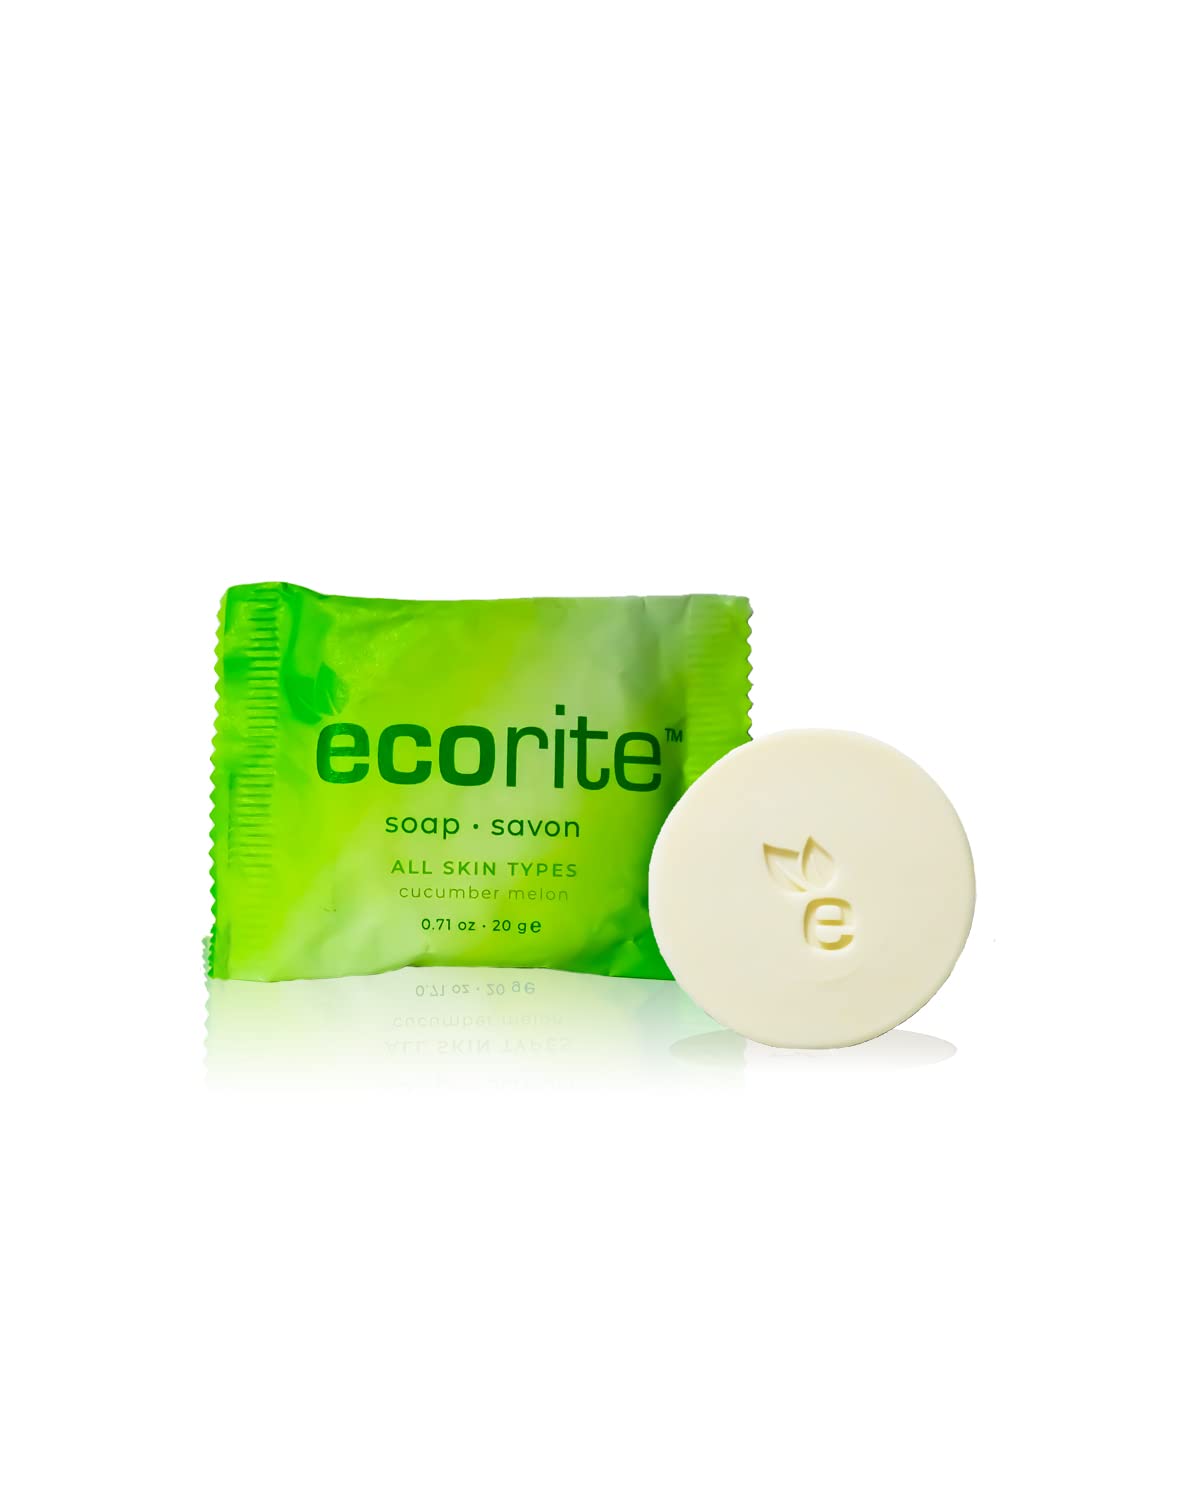 Ecorite Facial Bar with Cucumber-Melon Fragrance, Travel Size Hotel Amenities Biodegradable/Recyclable Frosted Sachet, 0.70 / m, Pack of 288